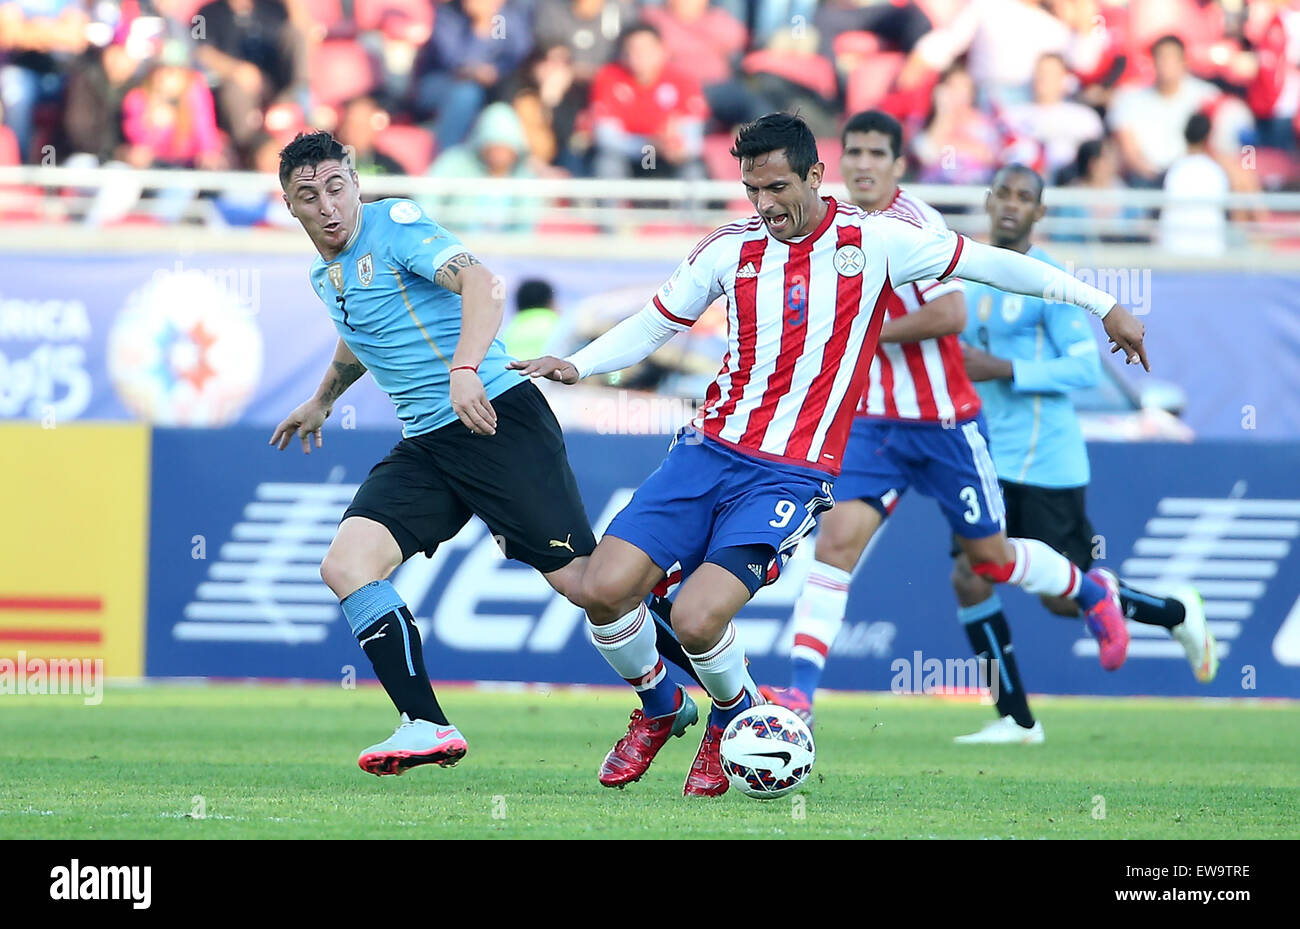 La Serena, Chile. 20th June, 2015. Uruguay's Cristian Rodriguez (L) vies with Paraguay's Roque Santa Cruz (R) during a Group B match between Uruguay and Paraguay at the 2015 American Cup in La Serena, Chile, June 20, 2015. The match ended with a 1-1 draw. Credit:  Xu Zijian/Xinhua/Alamy Live News Stock Photo